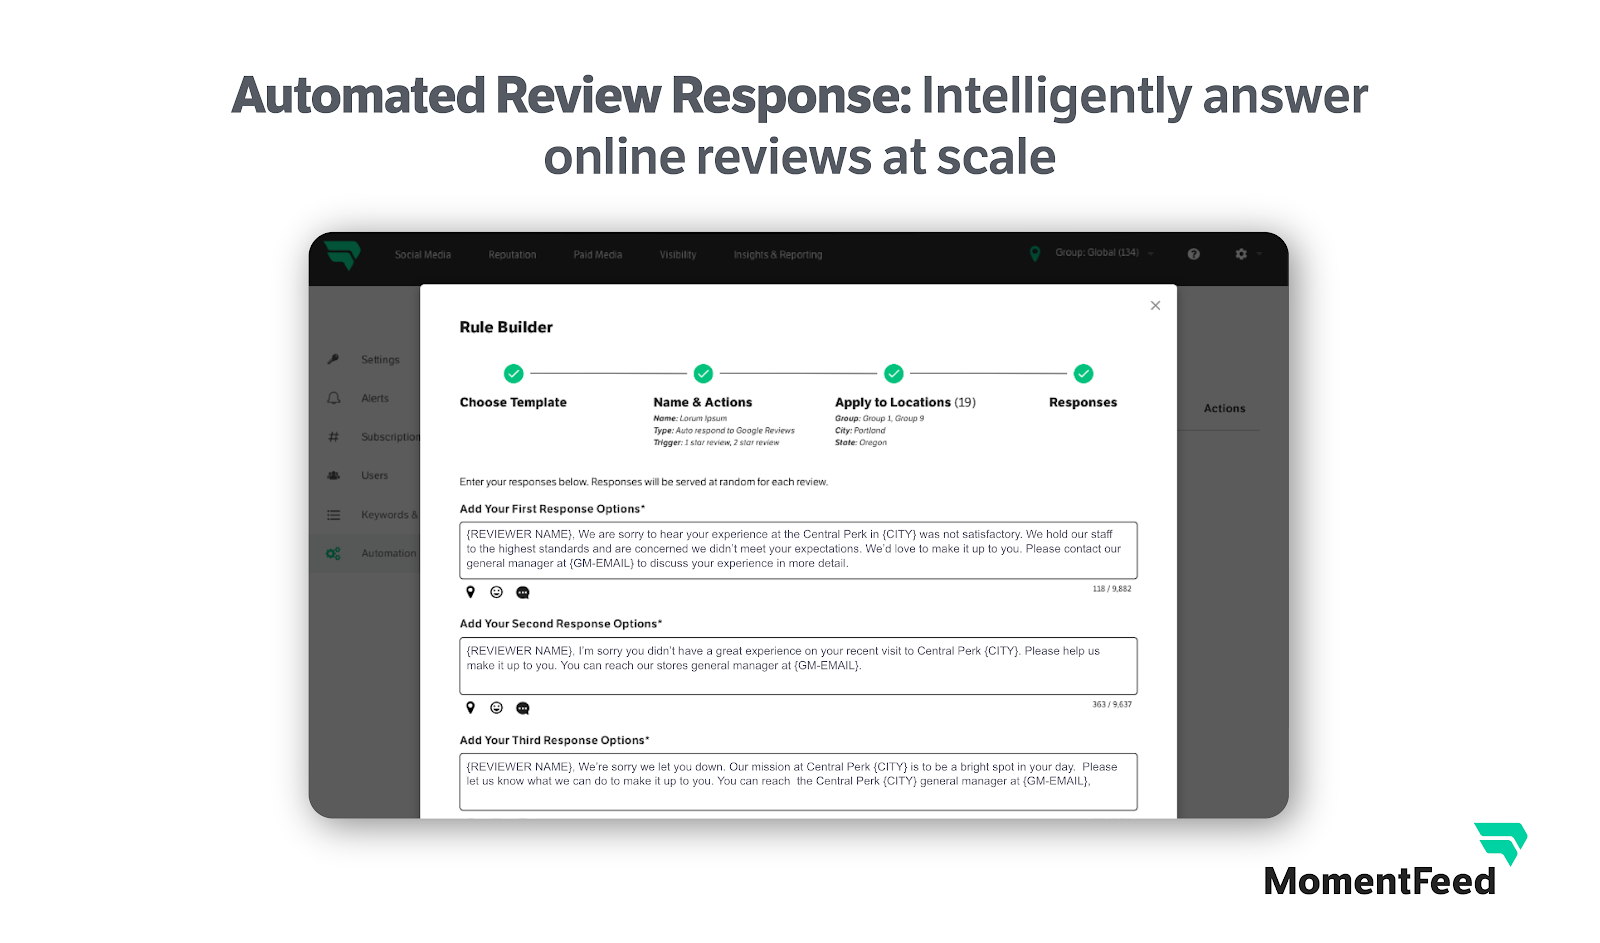 MomentFeed’s Automated Review Response provides a fast, intelligent way to produce a higher volume of personalized responses.